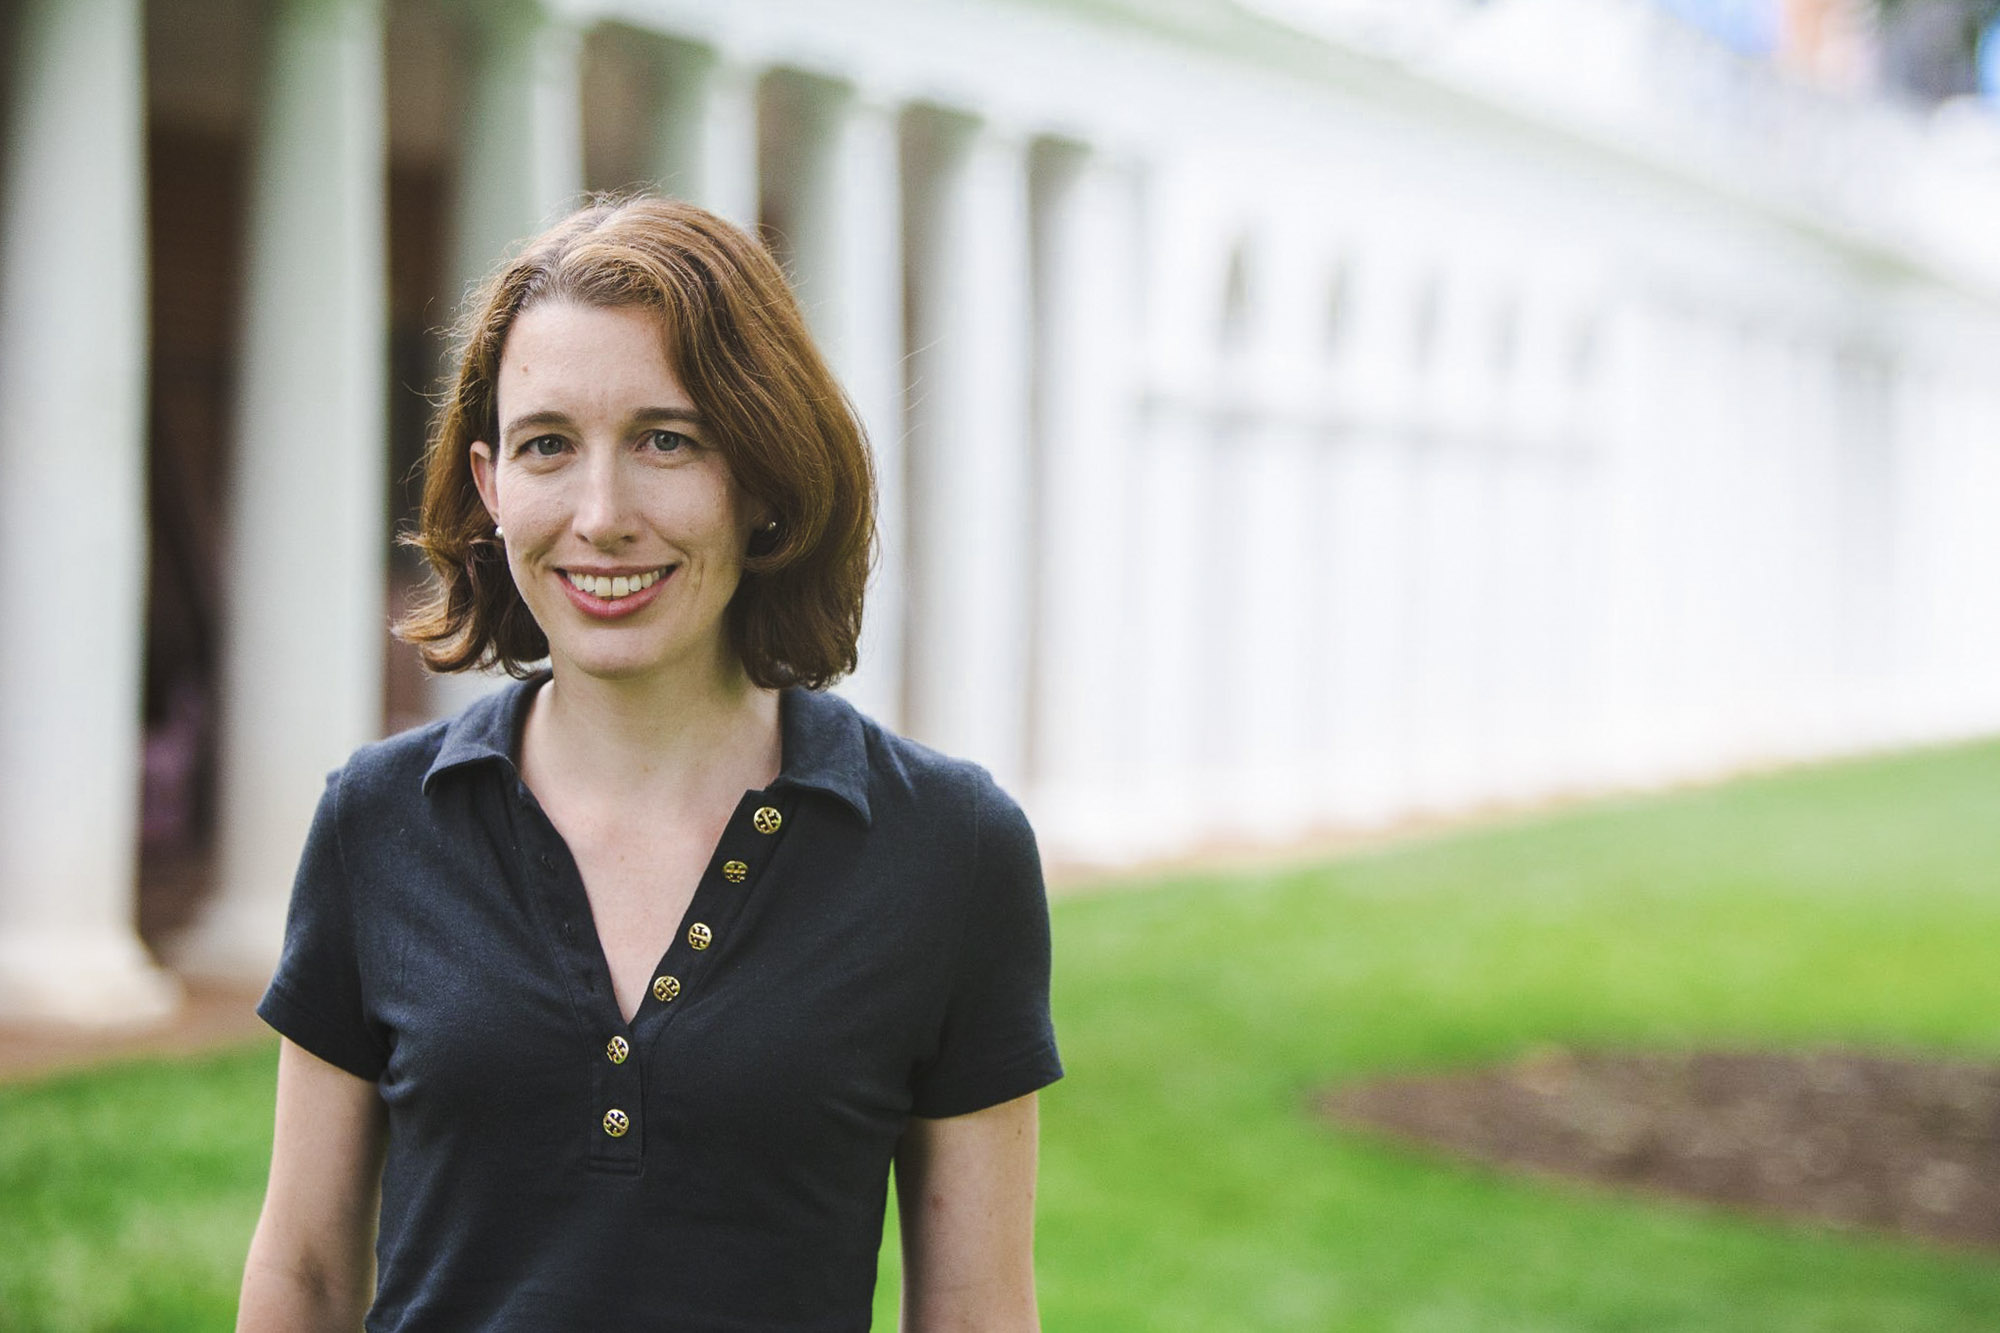 Batten professor Molly Lipscomb received the Public Impact-Focused Research Award for her work looking at the impact of bringing public services to low-income households in countries where services are needed.